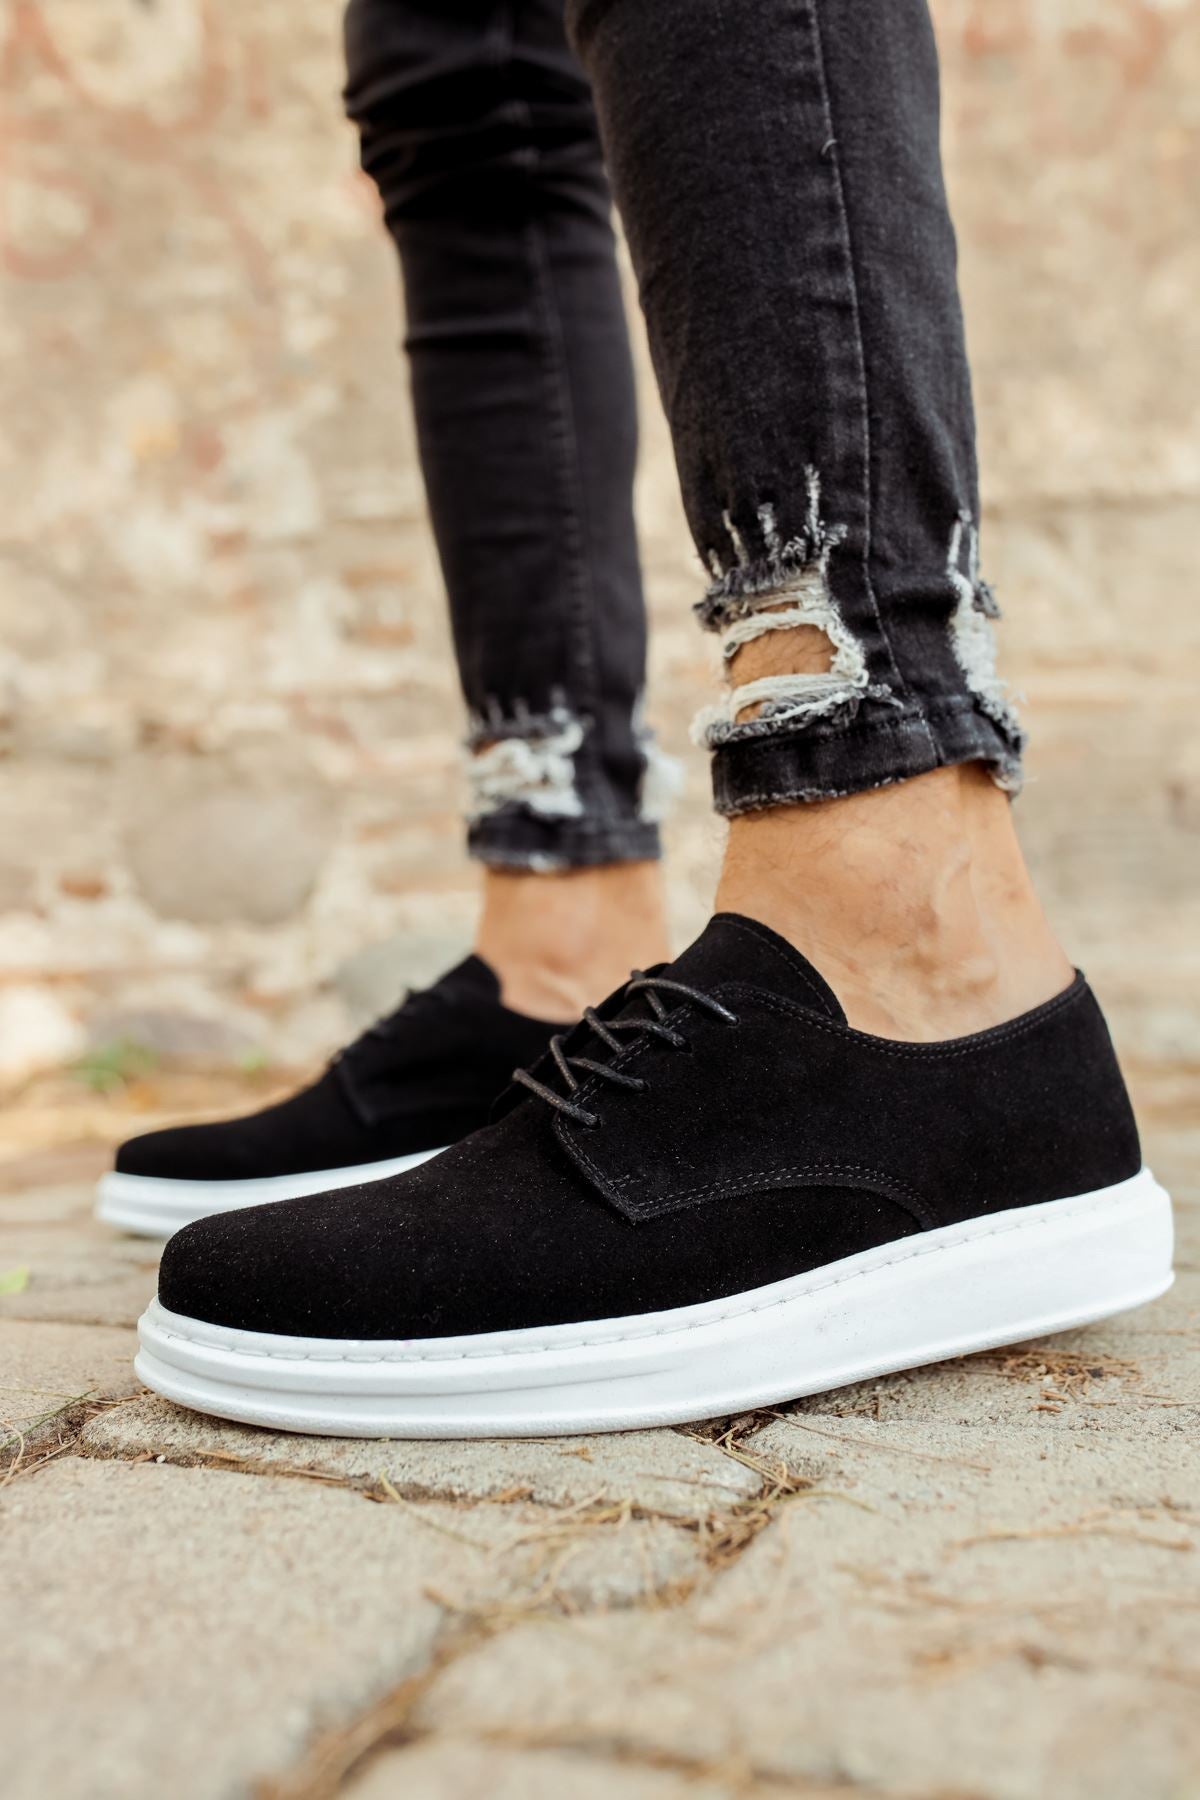 CH003 Suede BT Men's Sneaker Casual Shoes Black - STREETMODE ™